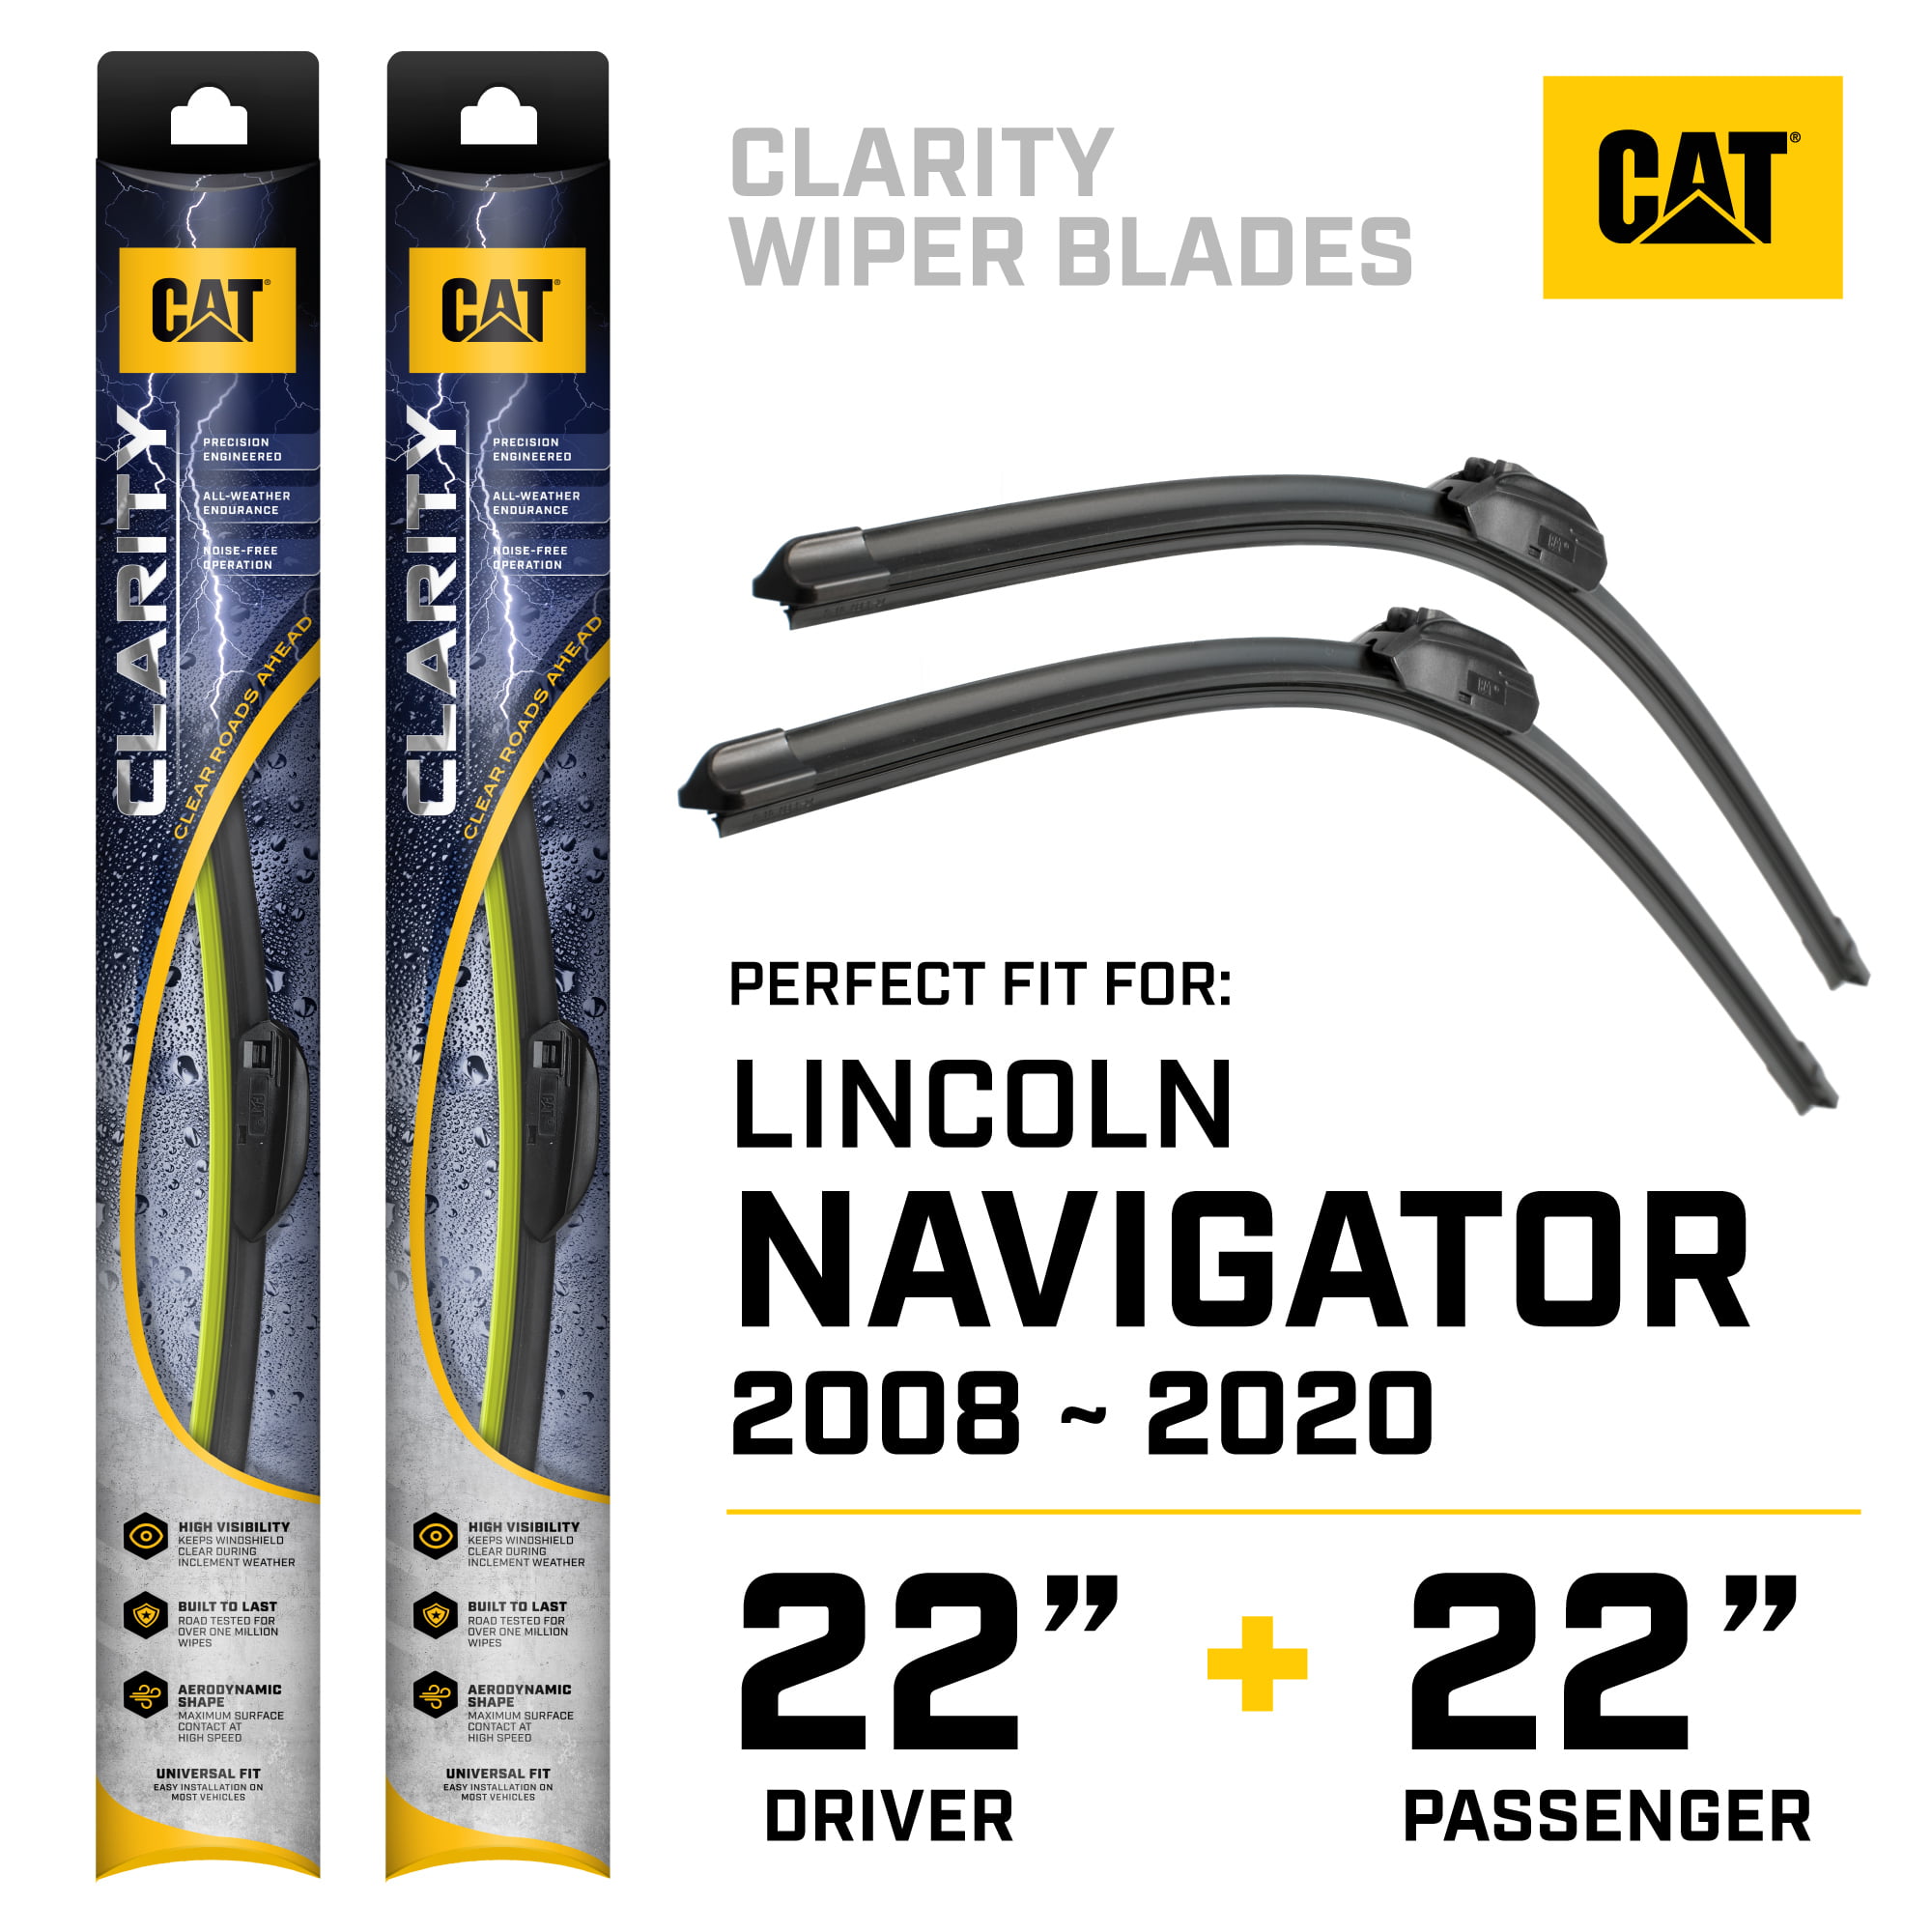 Caterpillar Clarity Premium Performance All Season Replacement Windshield Wiper Blades for Car Truck Van SUV 22 + 22 Inch - Perfect Fit for 2008-2020 Ford Expedition